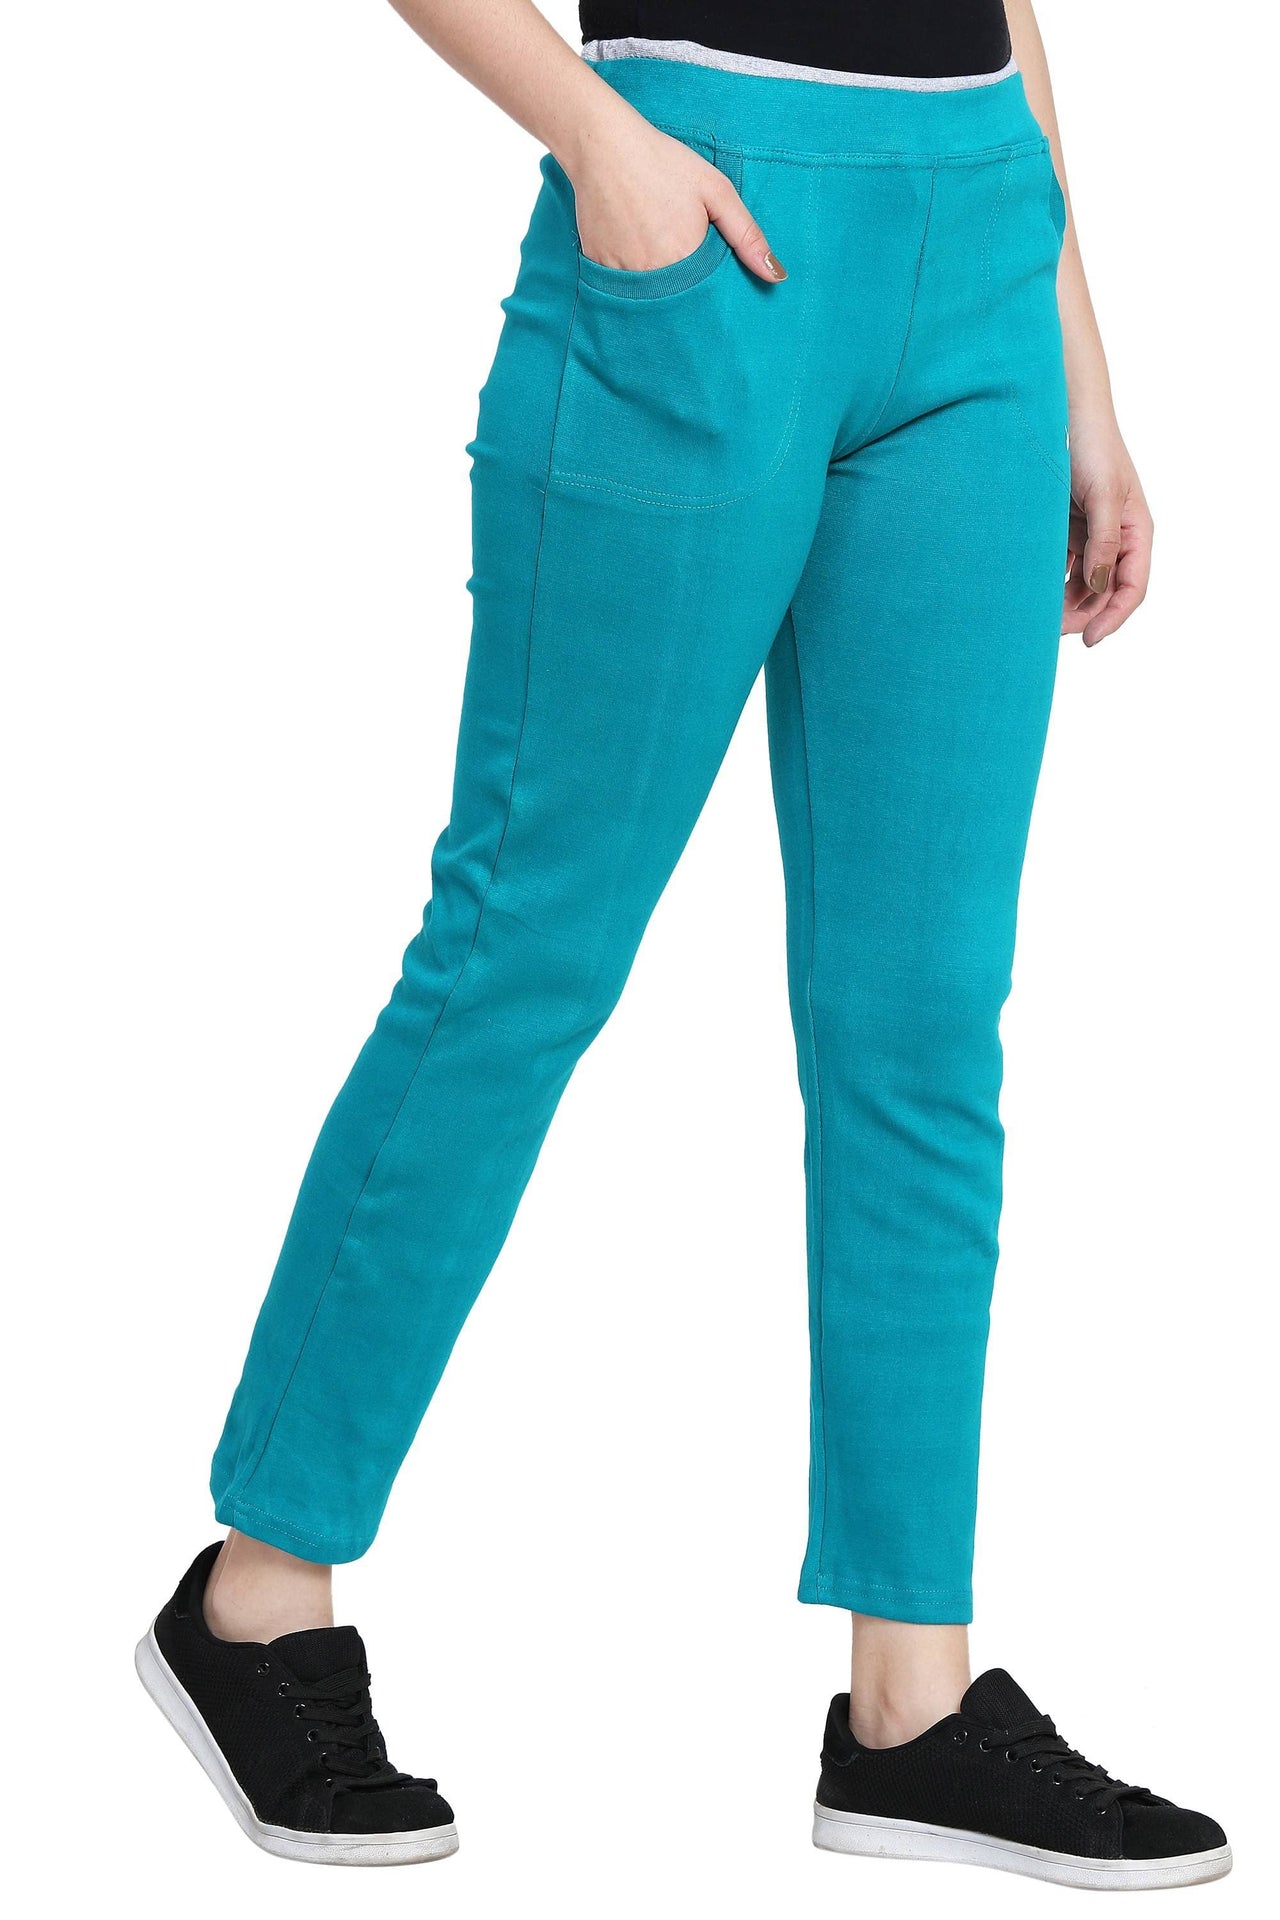 Asmaani Turquoise color Hosiery Lower with Two Side Pockets.